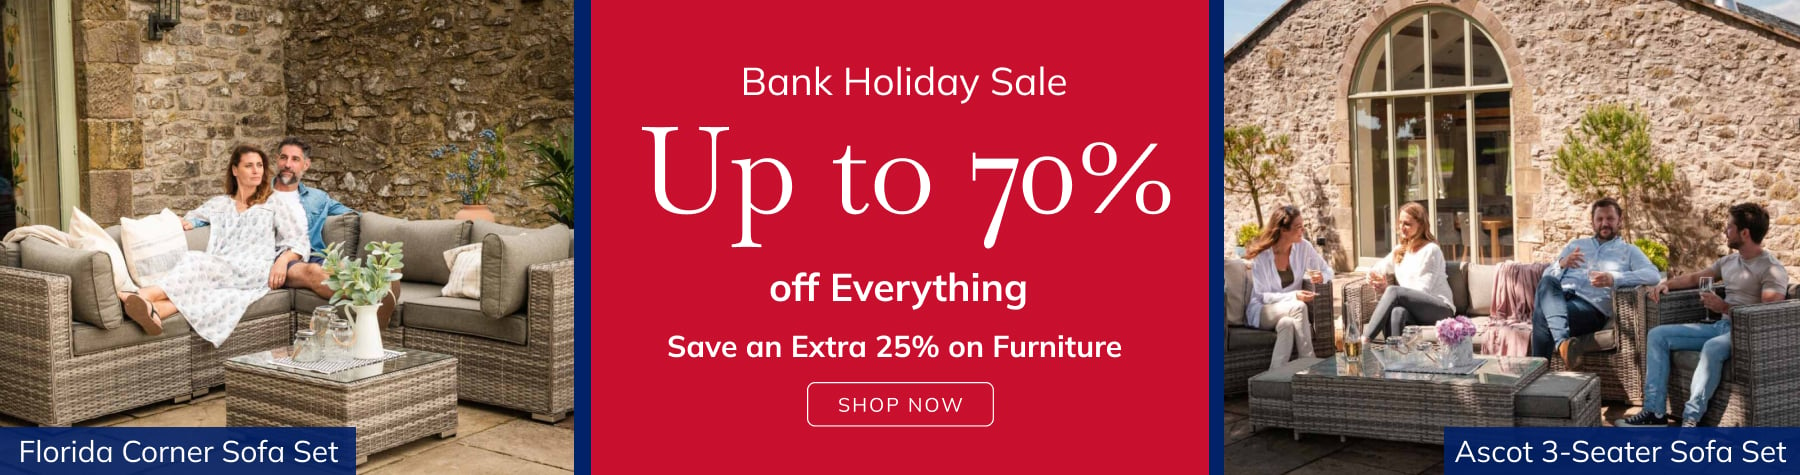 Bank Holiday Sale Up to 70% off Everything